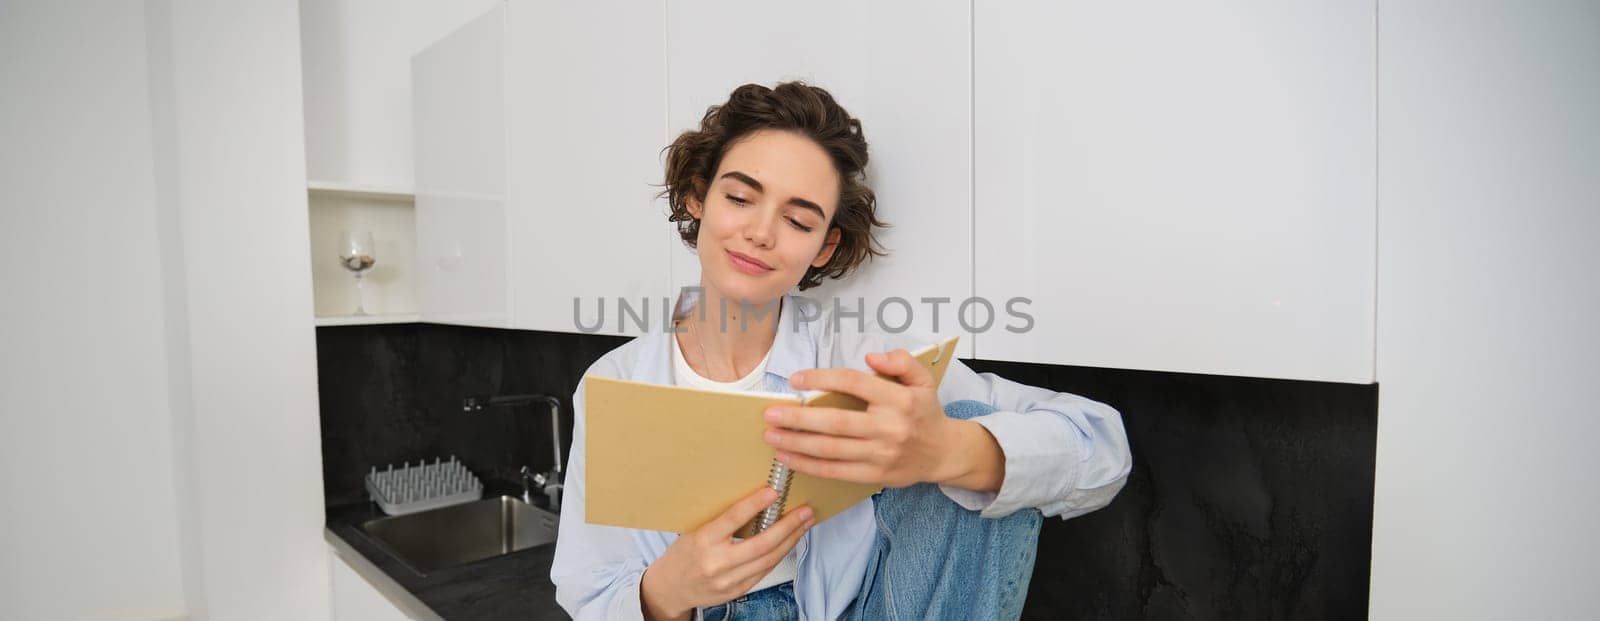 Portrait of smiling young woman reading journal, enjoys comfort at home, holding notebook, looking happy, relaxing indoors.